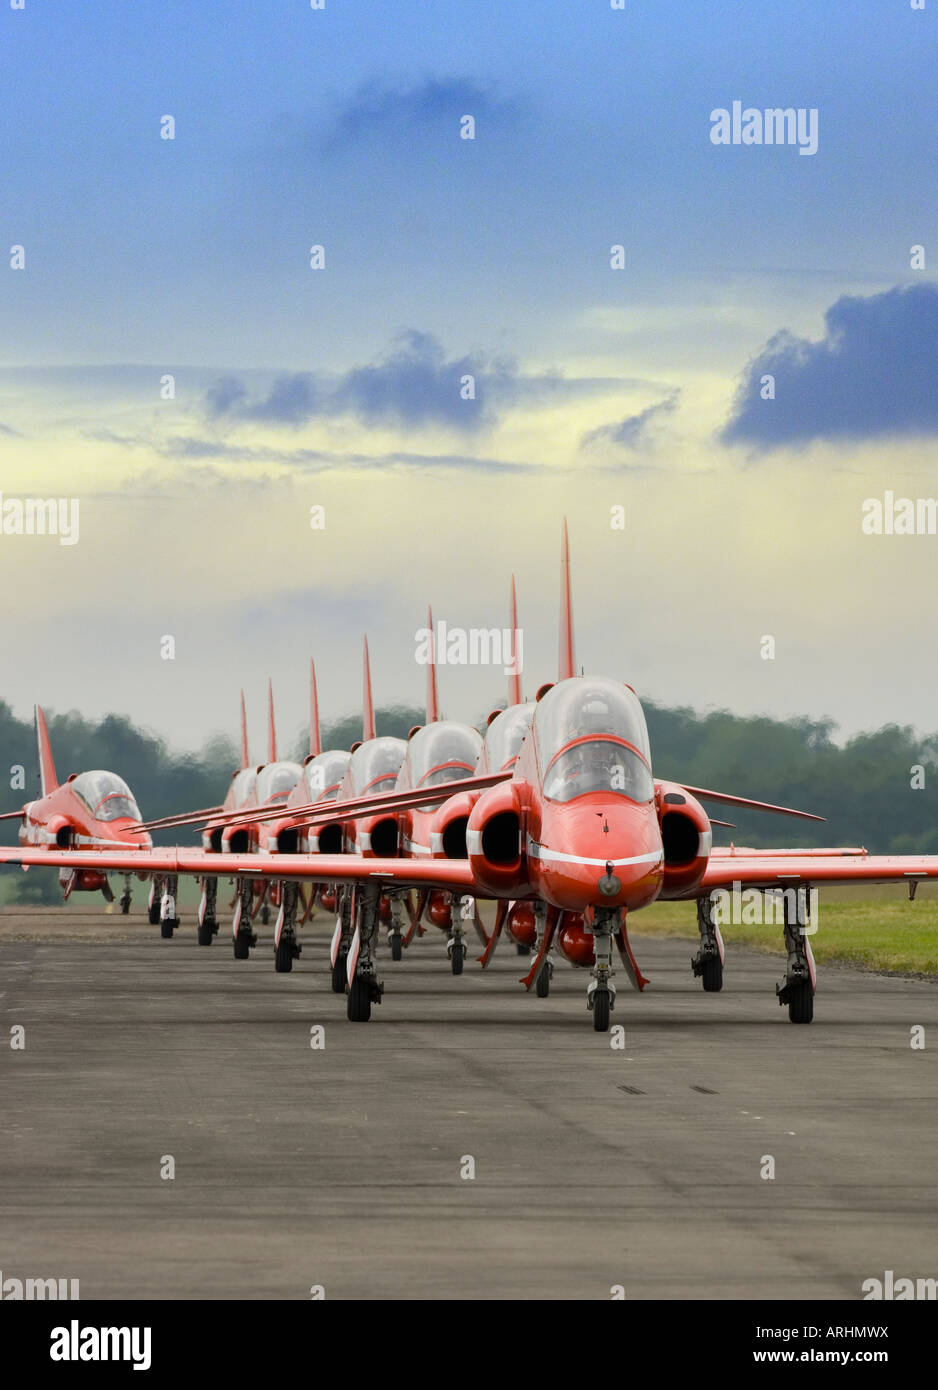 The Red Arrows RAF formation display team taxiing their Hawk aircraft to stand Stock Photo